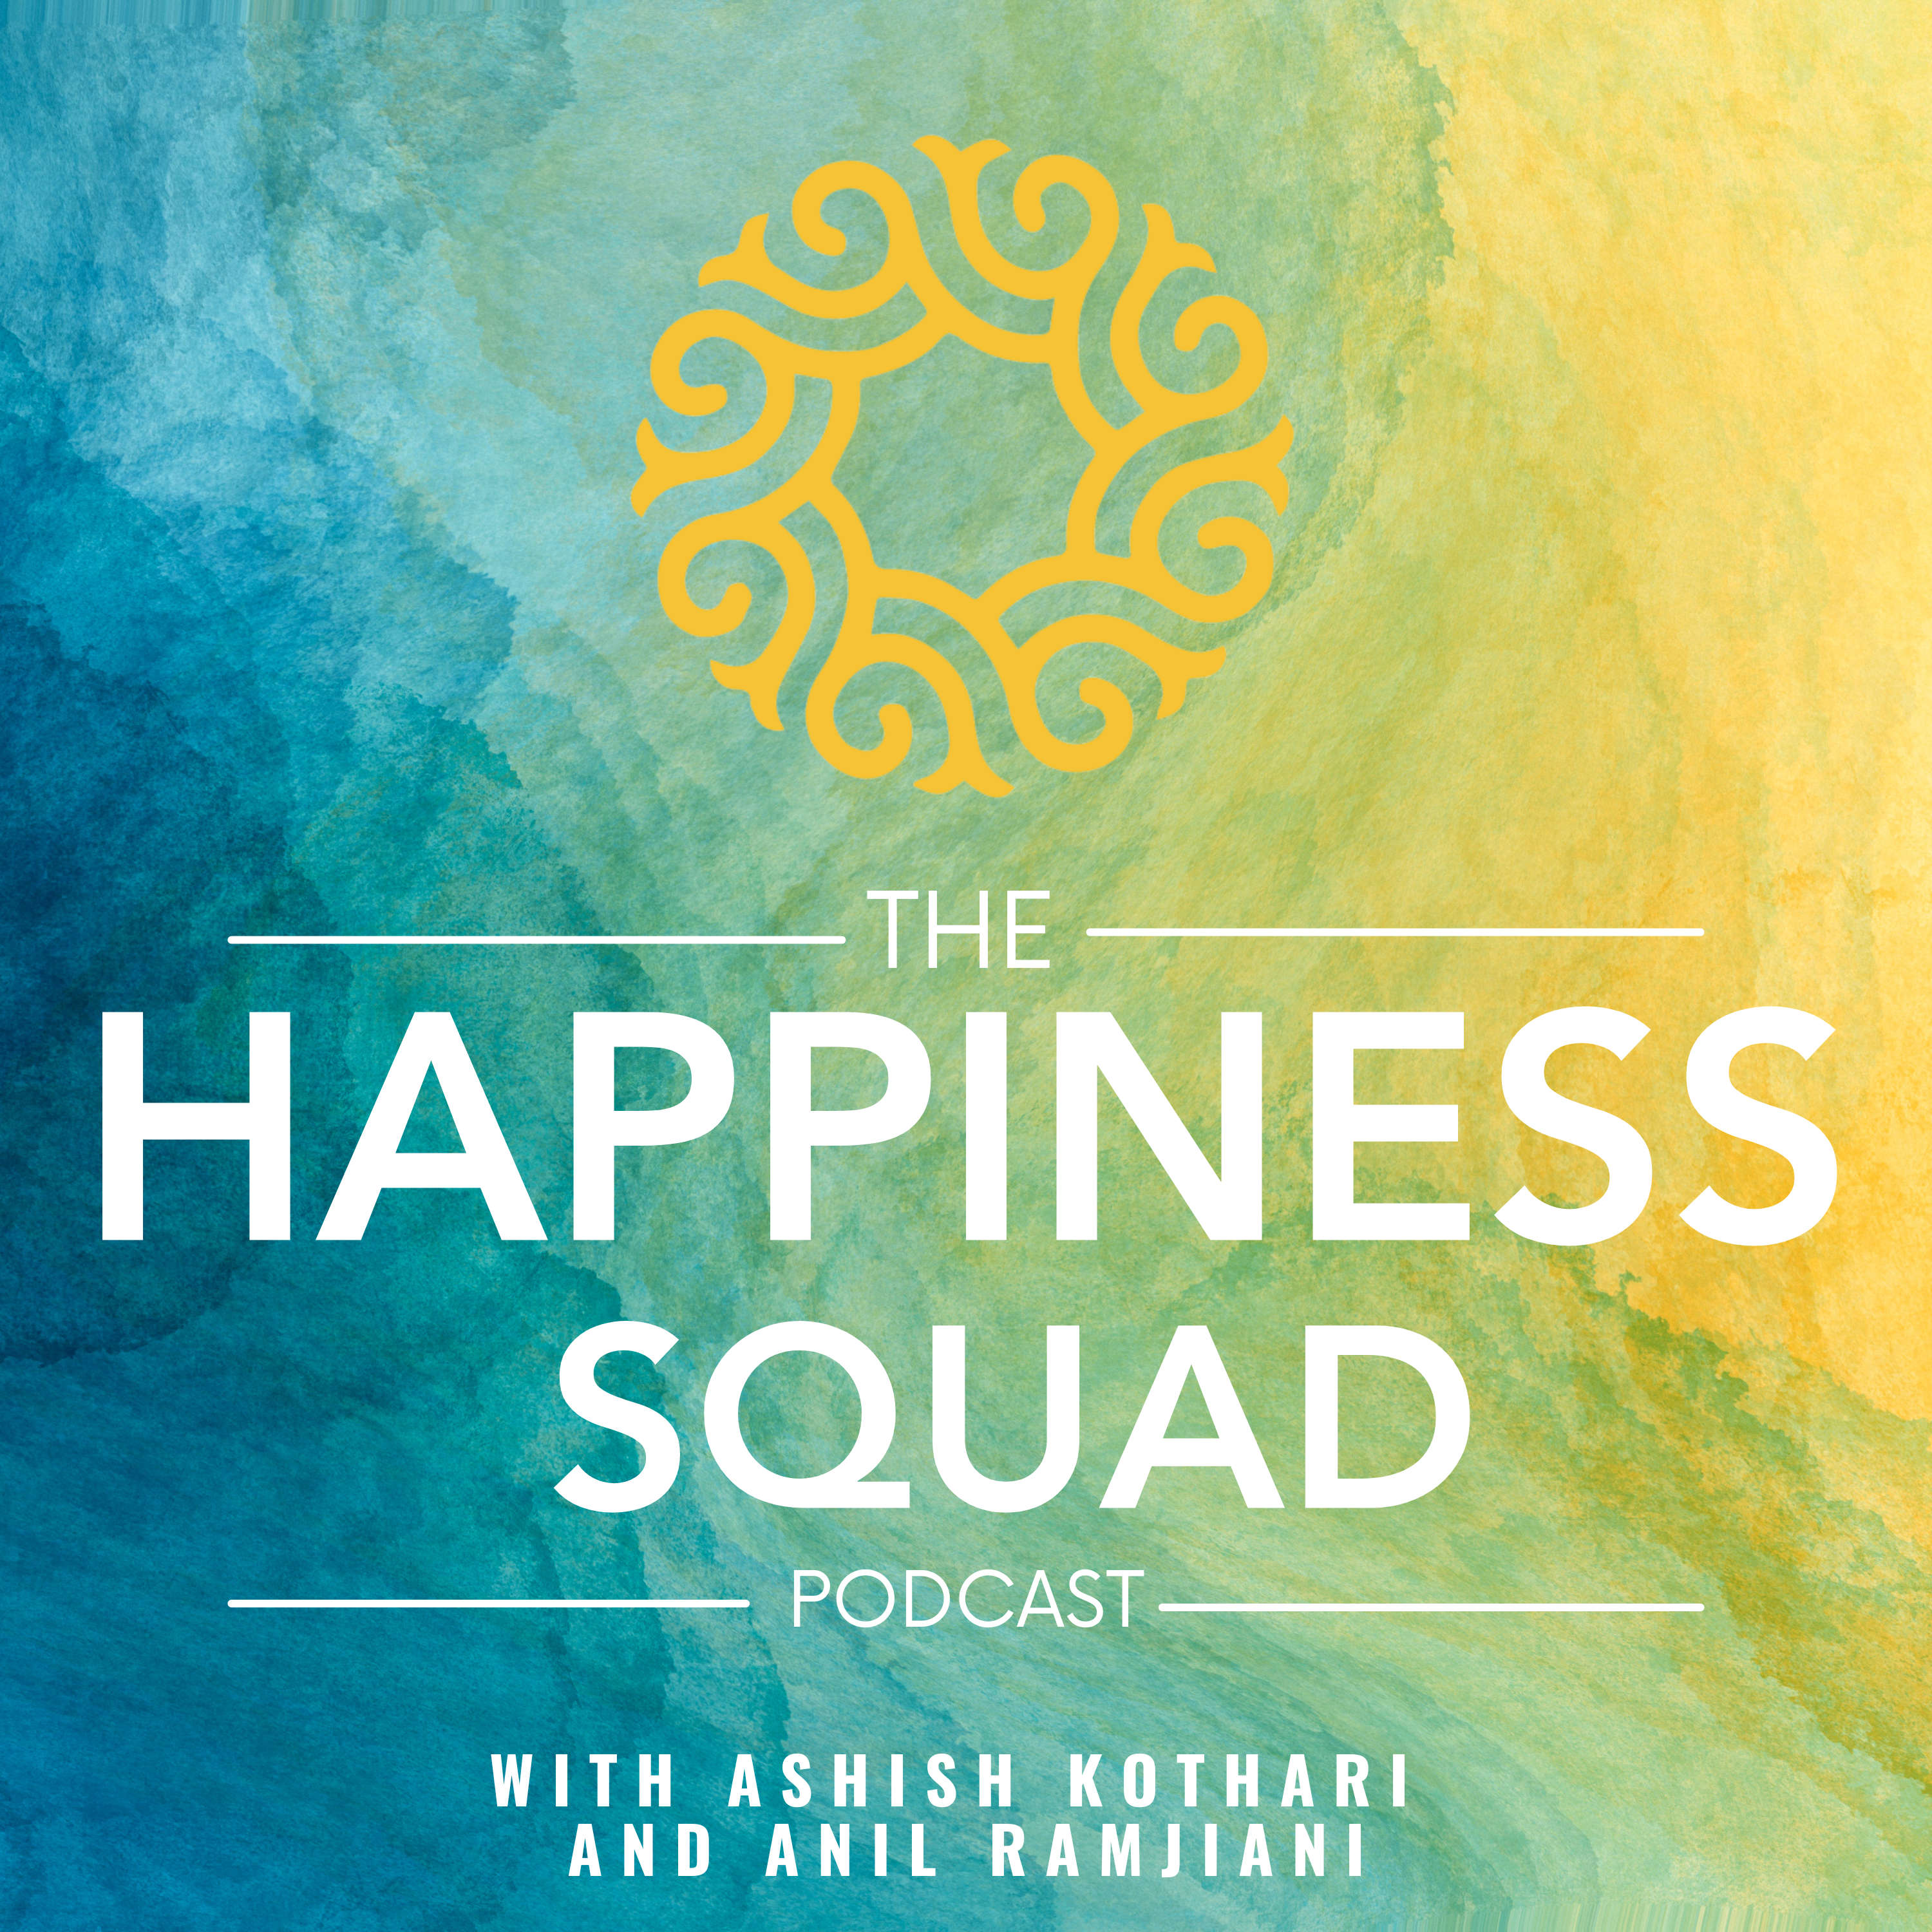 Artwork for podcast The Happiness Squad